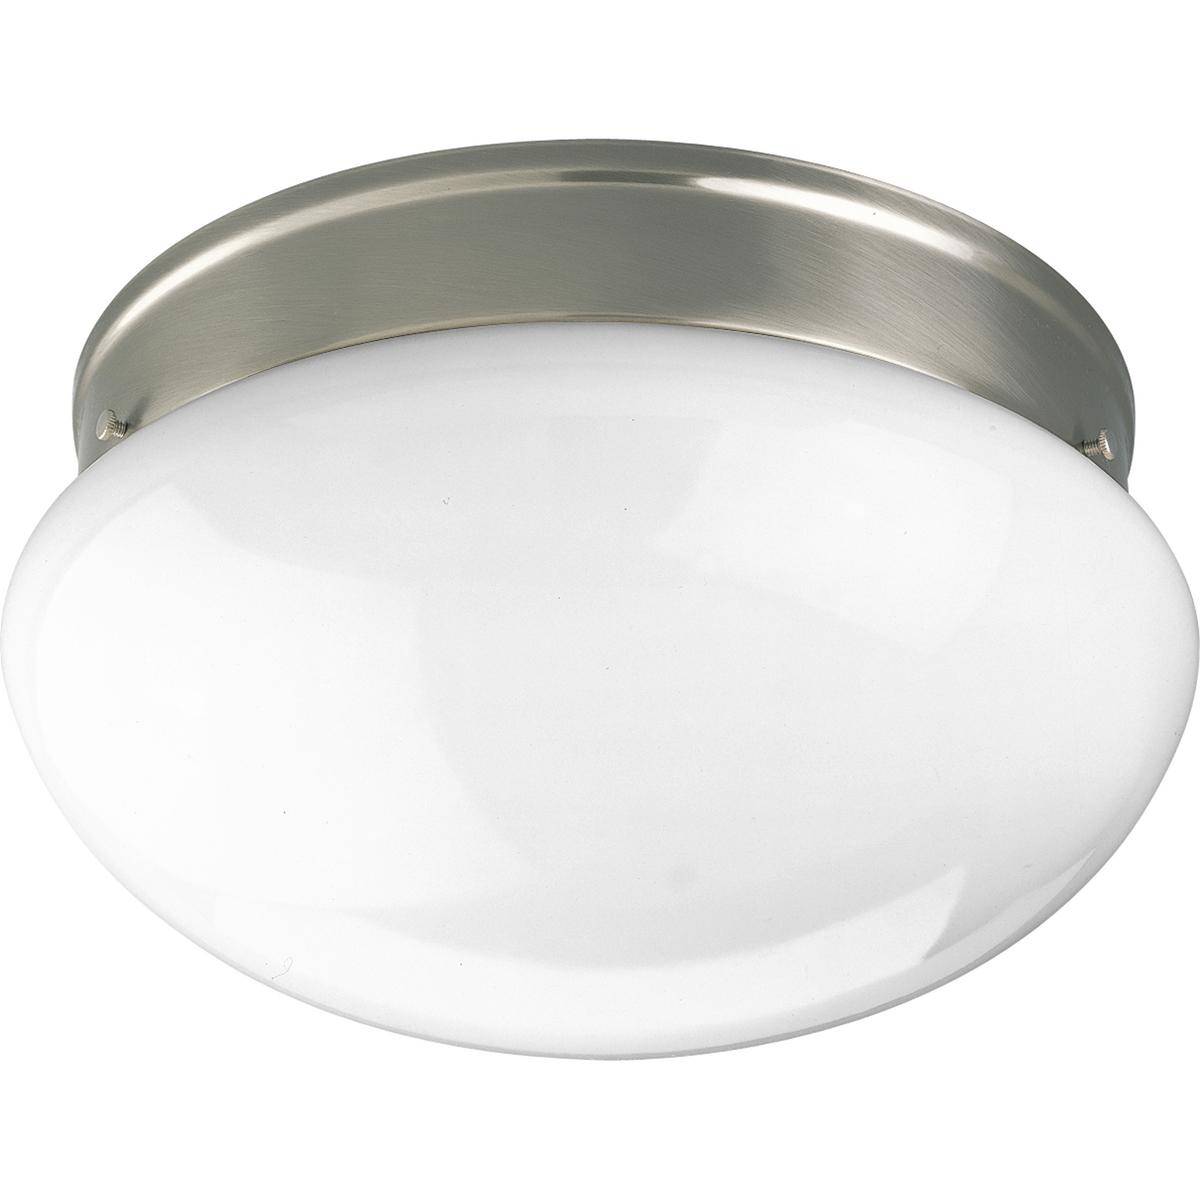 Hubbell P3412-09 With a monochrome construction perfect for a contemporary home, this two-light fixture charms with its mushroom-shaped white glass shade. The look is clean and unobtrusive, playing on the freshness of crisp white. A traditional two-light close to ceiling 